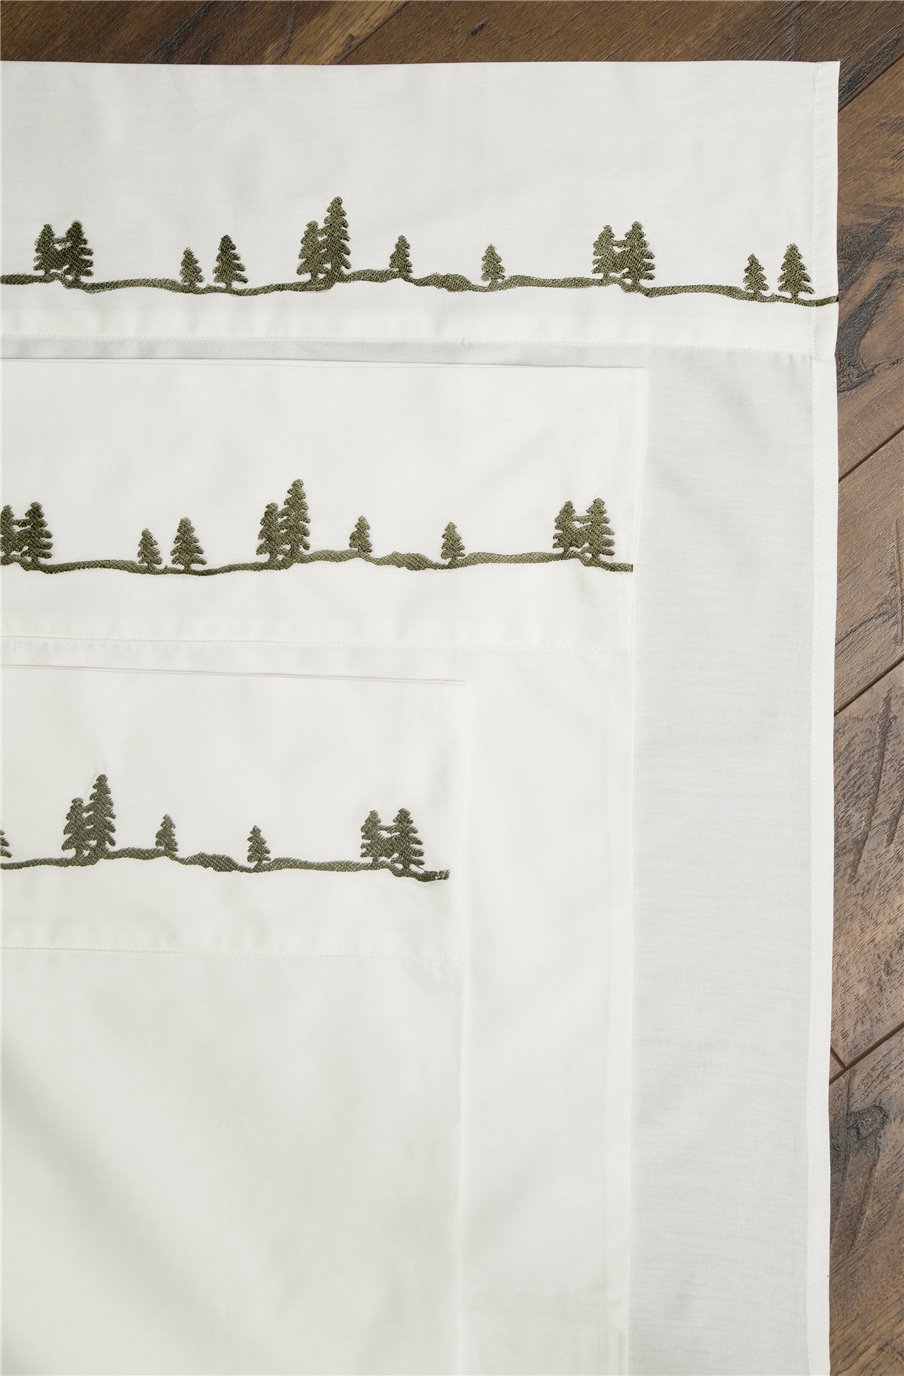 Carstens Embroidered Pines Rustic Sheet Set, Full